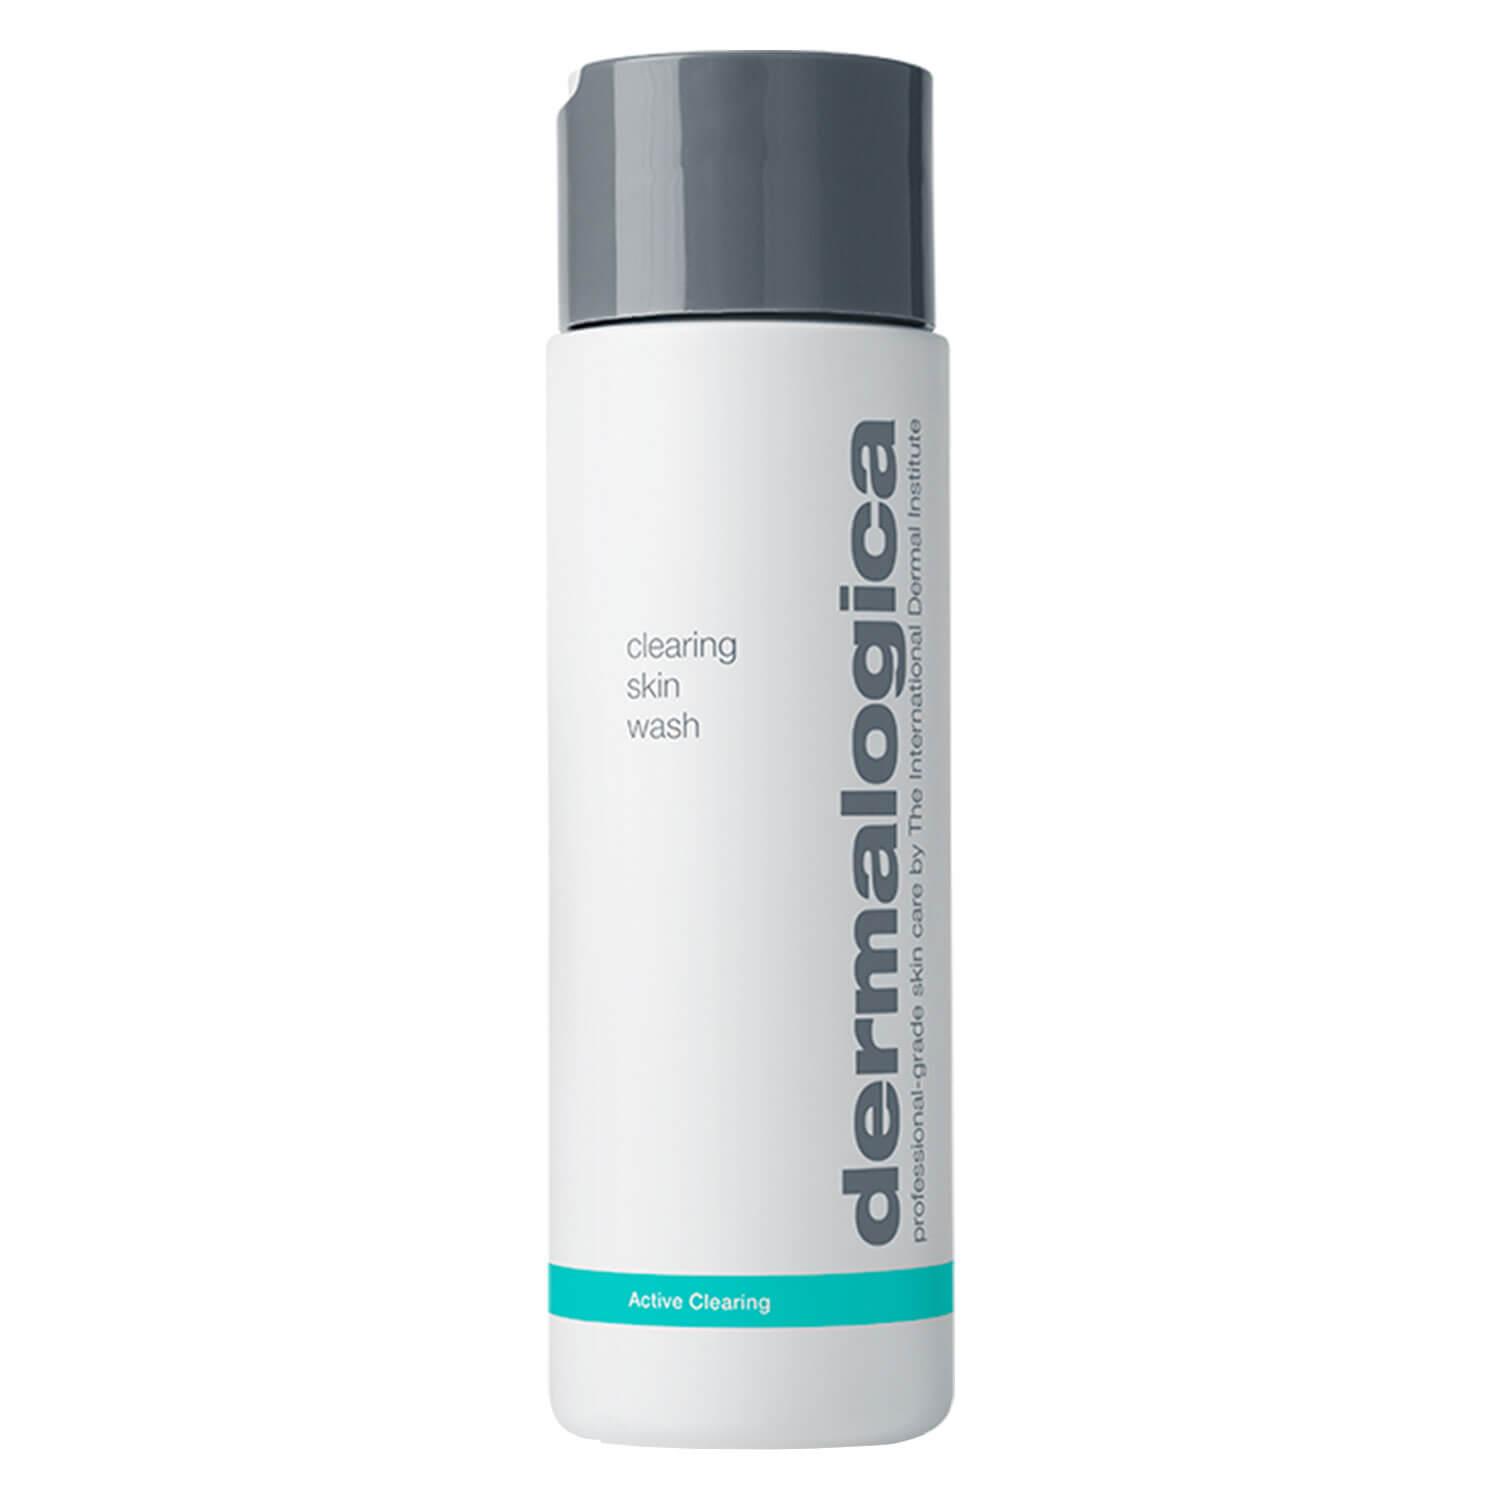 Active Clearing - Clearing Skin Wash